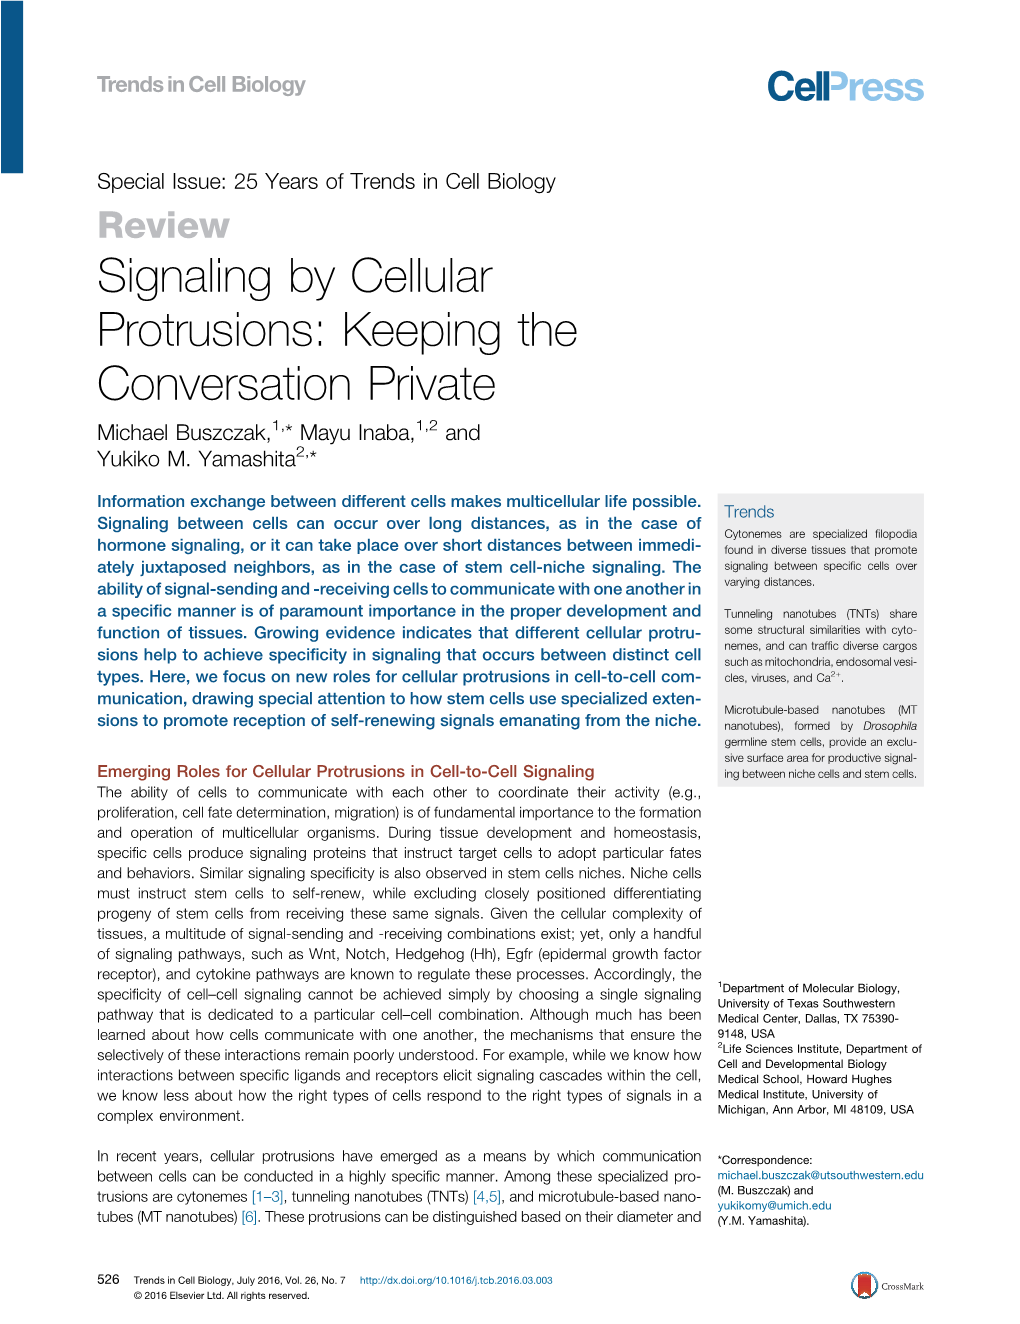 Signaling by Cellular Protrusions: Keeping the Conversation Private